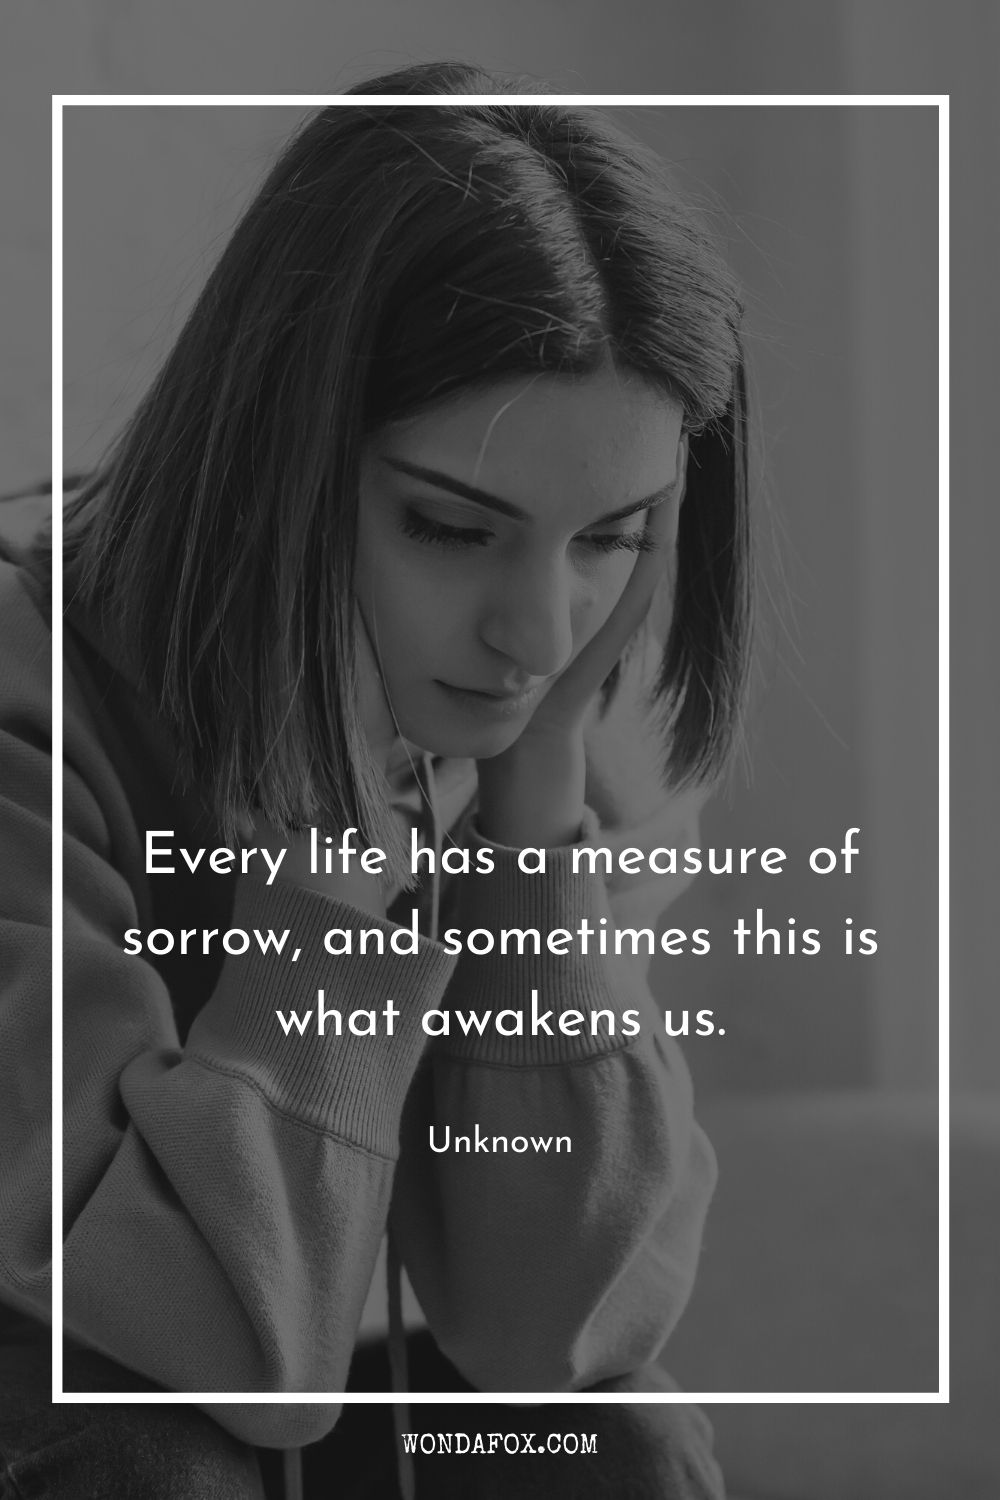 Every life has a measure of sorrow, and sometimes this is what awakens us.